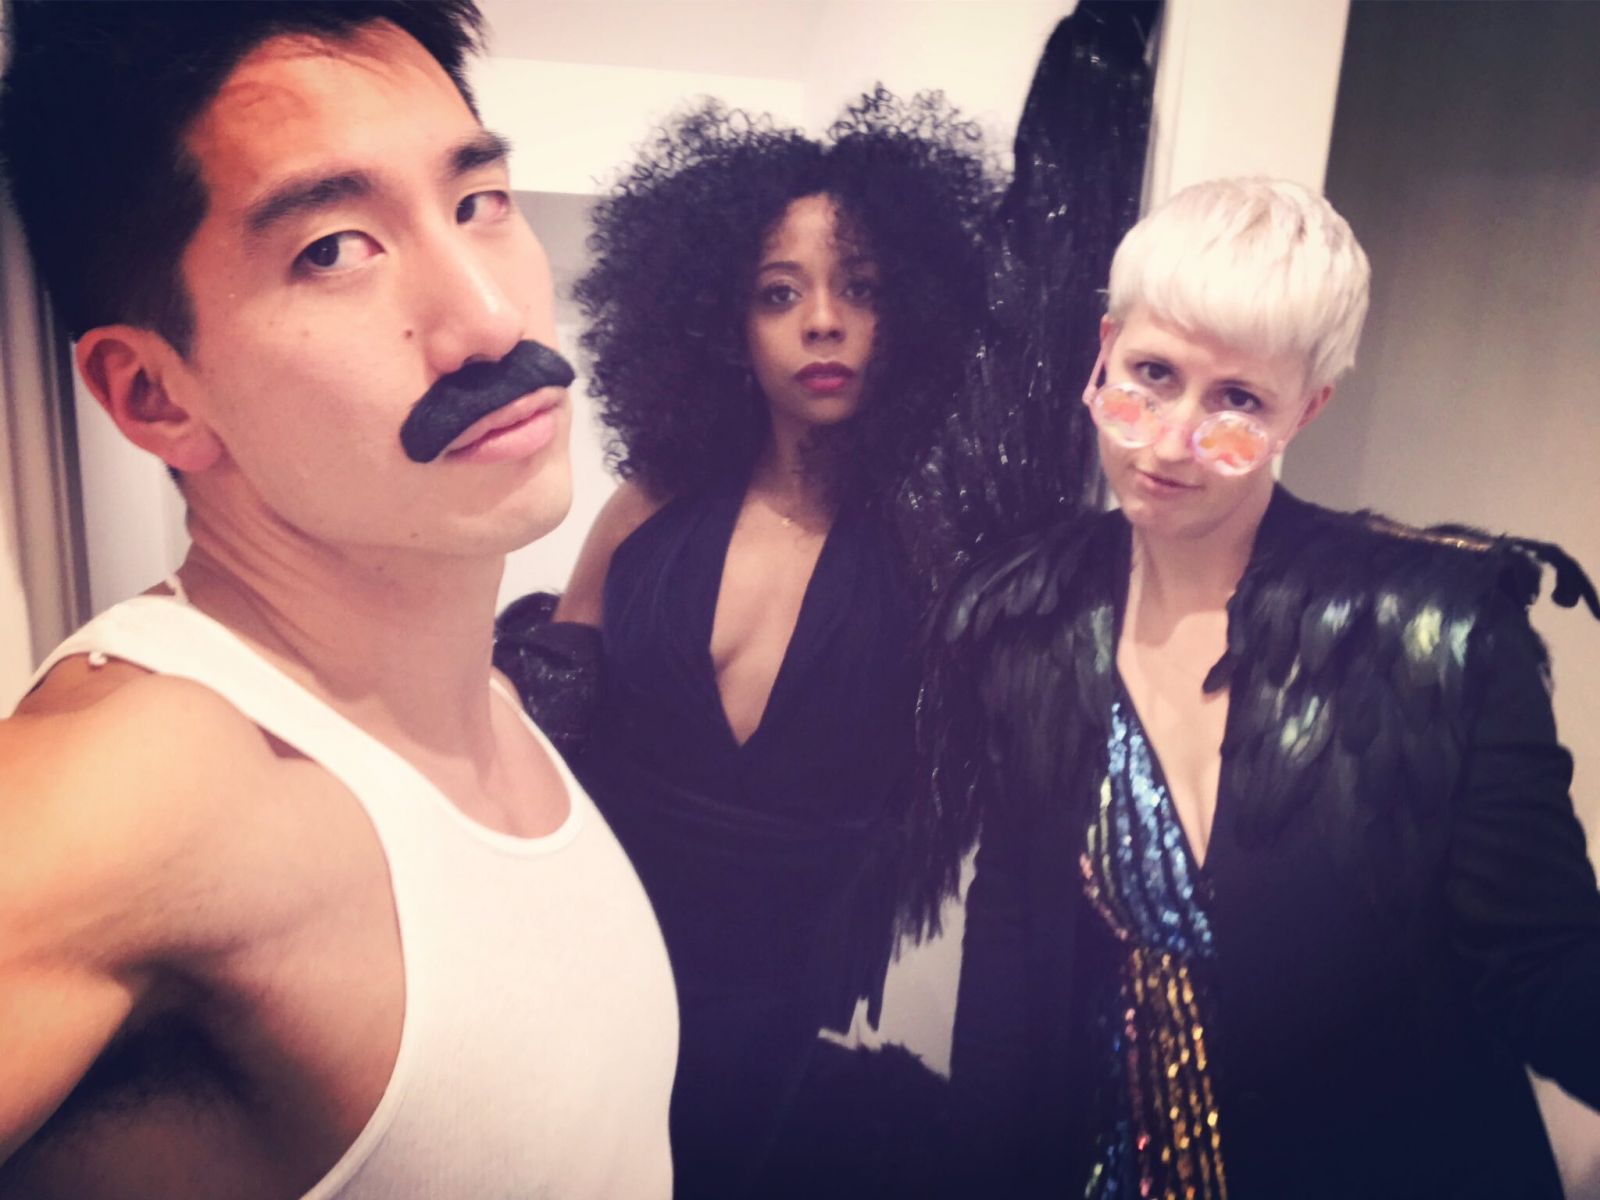 Briahna Joy Gray Dressed As Diana Ross With Her Friends